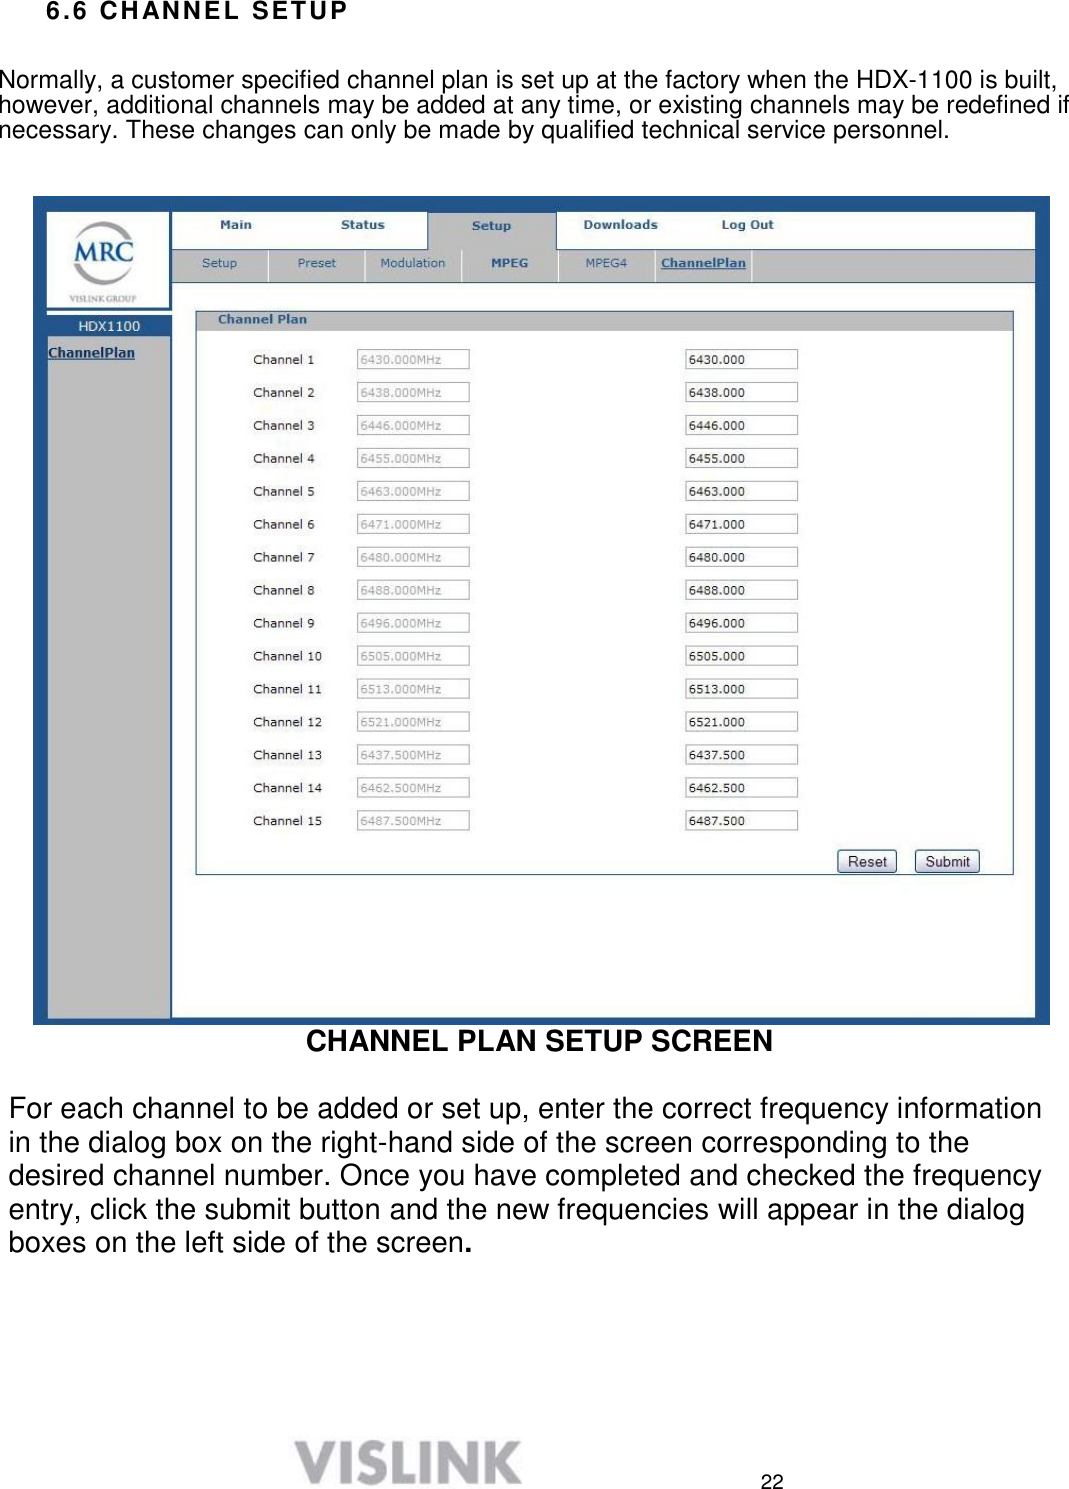  22 6.6 CHANNEL SETUP   Normally, a customer specified channel plan is set up at the factory when the HDX-1100 is built, however, additional channels may be added at any time, or existing channels may be redefined if necessary. These changes can only be made by qualified technical service personnel.    CHANNEL PLAN SETUP SCREEN  For each channel to be added or set up, enter the correct frequency information in the dialog box on the right-hand side of the screen corresponding to the desired channel number. Once you have completed and checked the frequency entry, click the submit button and the new frequencies will appear in the dialog boxes on the left side of the screen.      